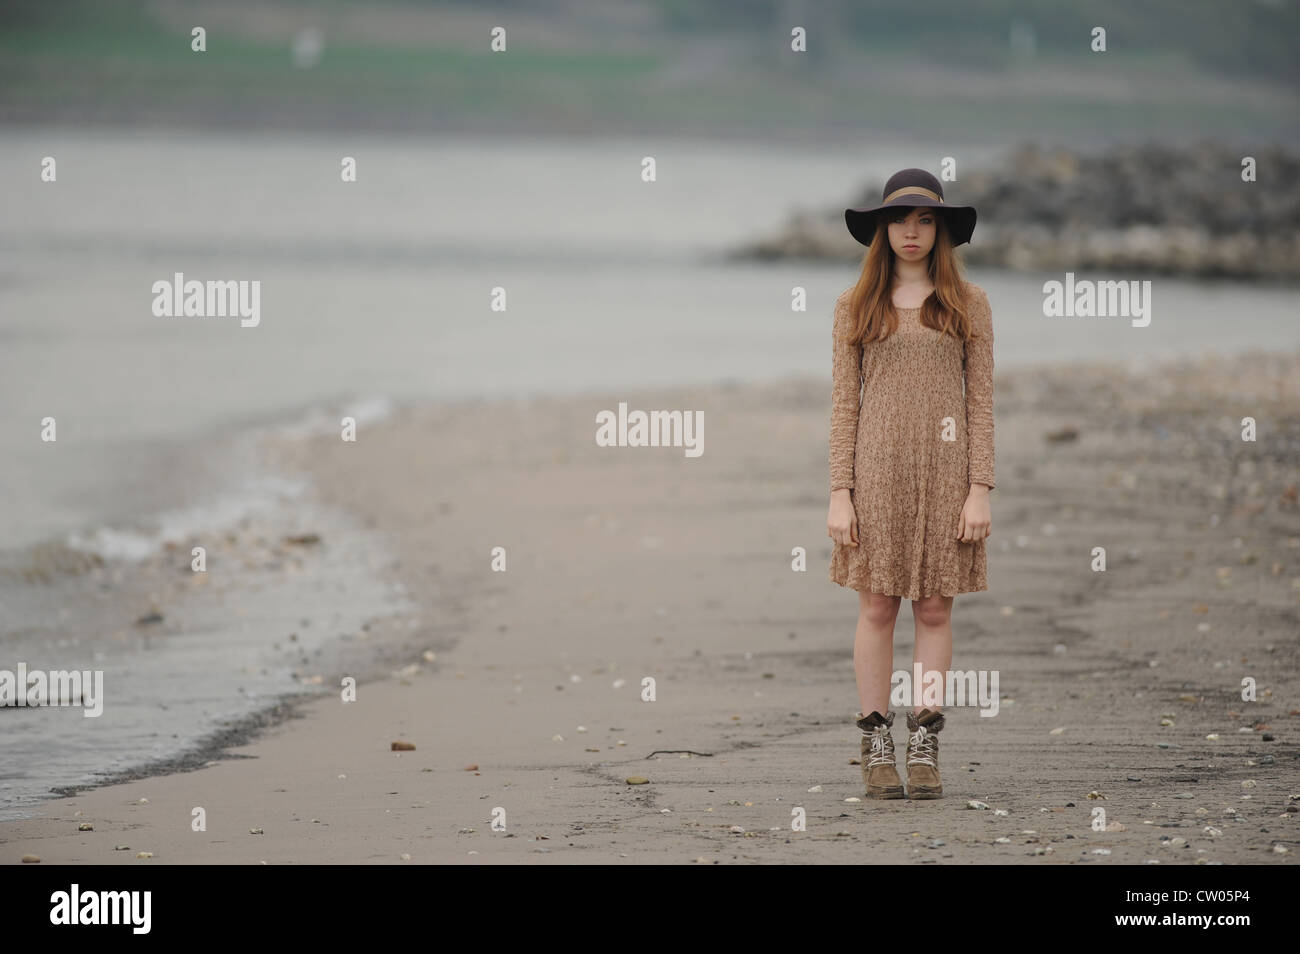 Teenage Girl standing on beach Banque D'Images